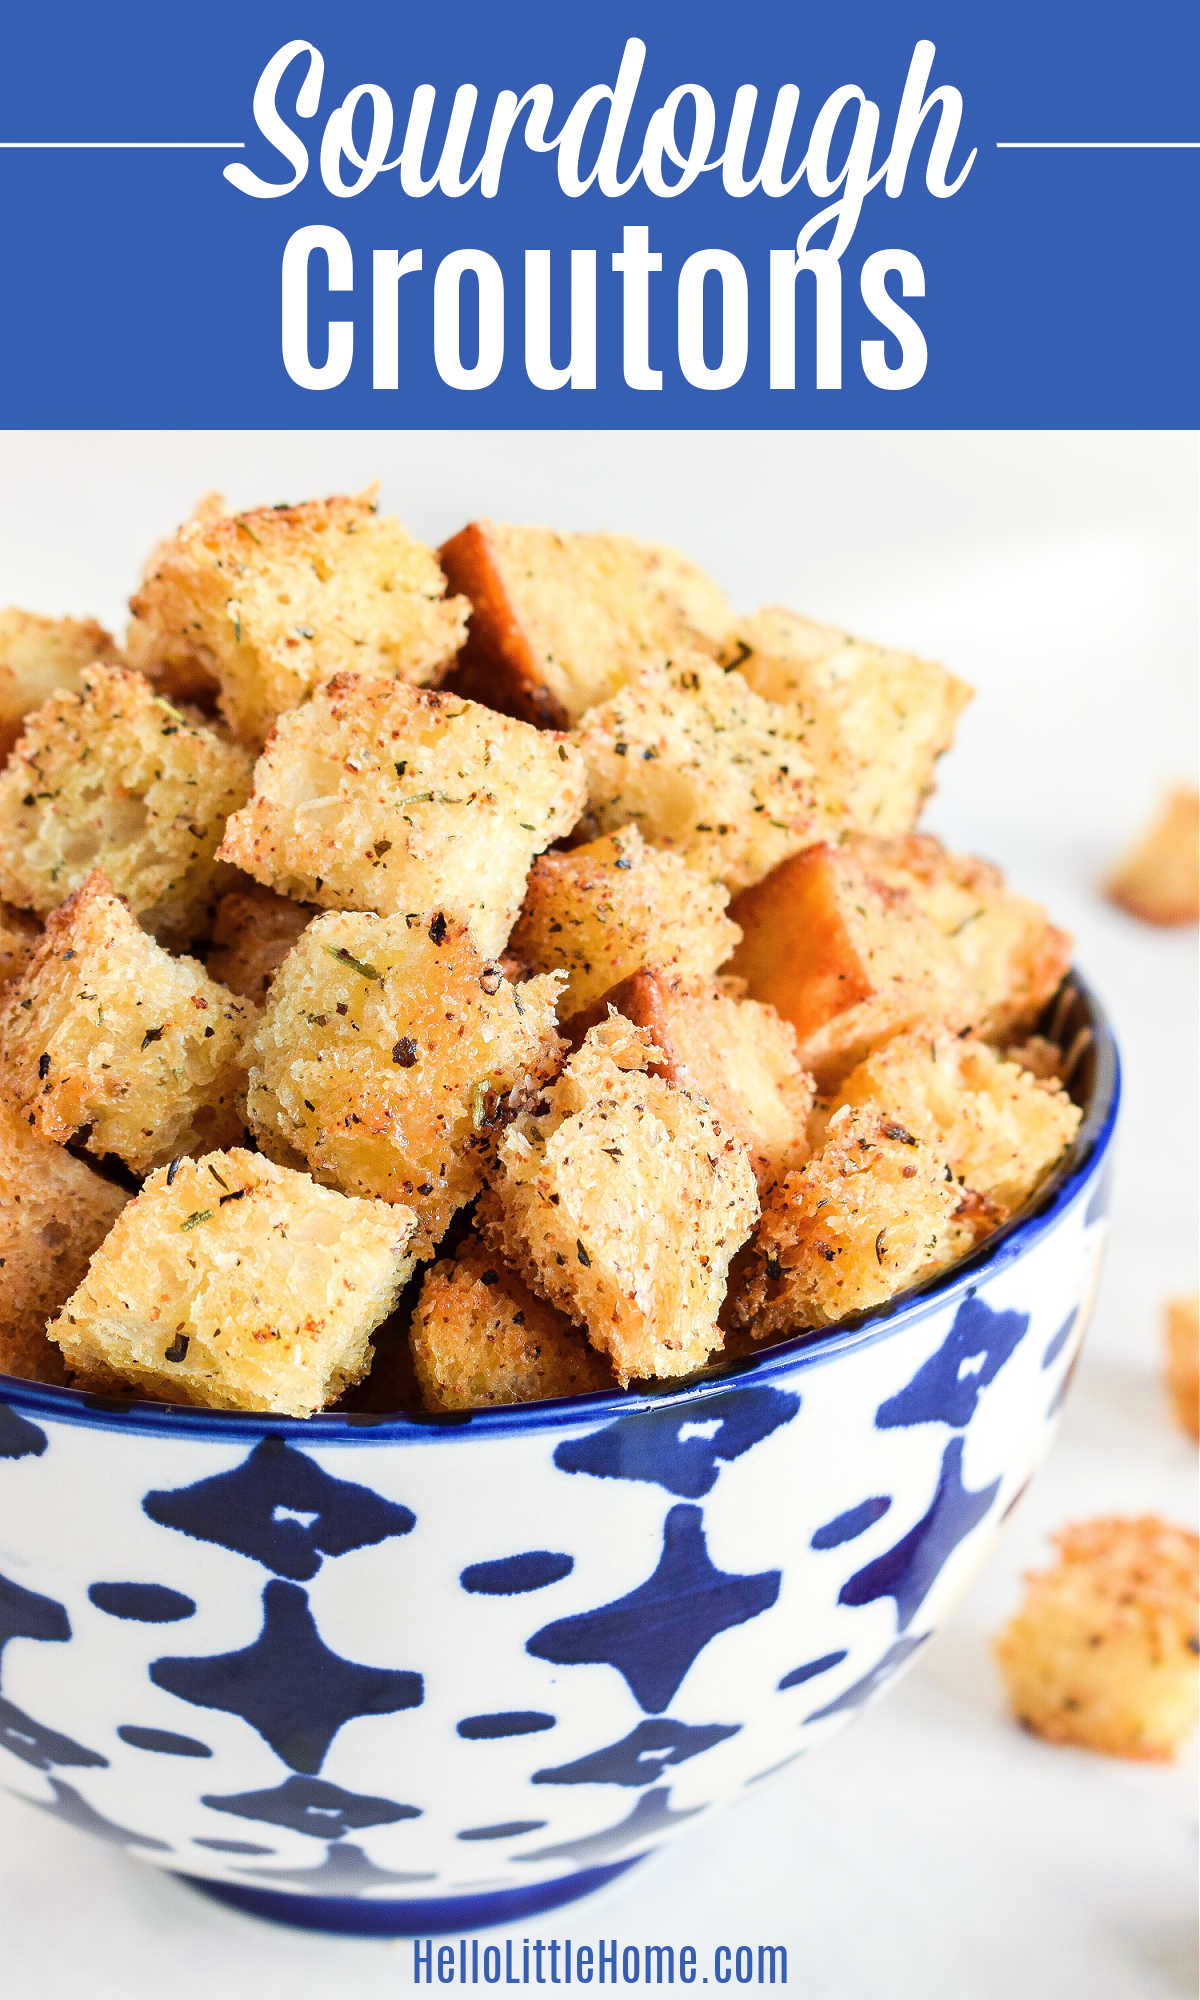 Closeup of Sourdough Croutons in a blue patterned bowl.